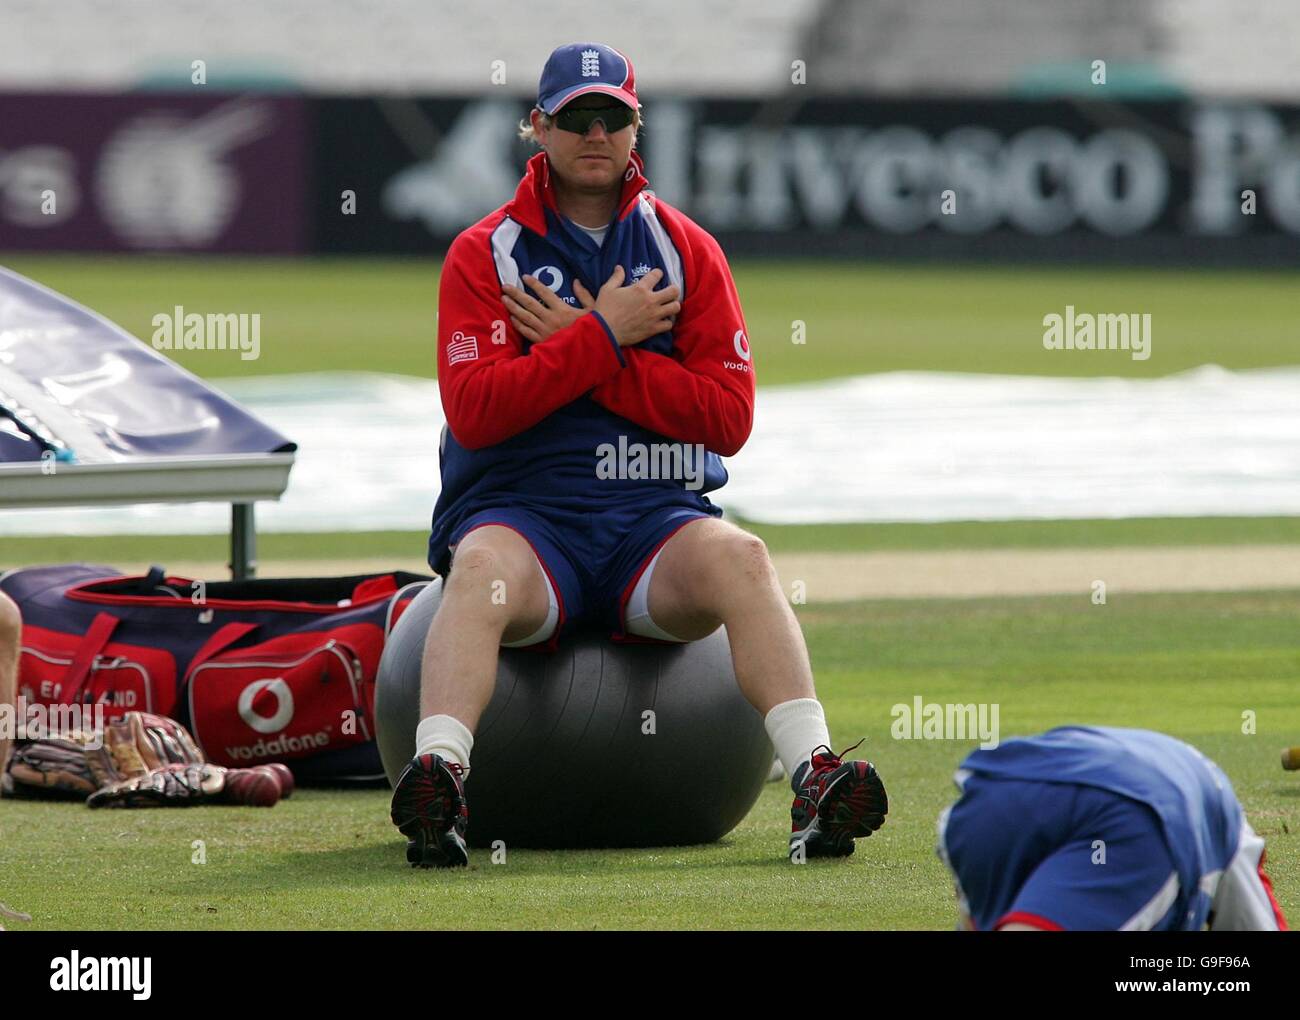 CRICKET - England nets session - London. England's Matthew Hoggard warms-up ahead of the nets session at The Brit Oval, Kennington, London. Stock Photo